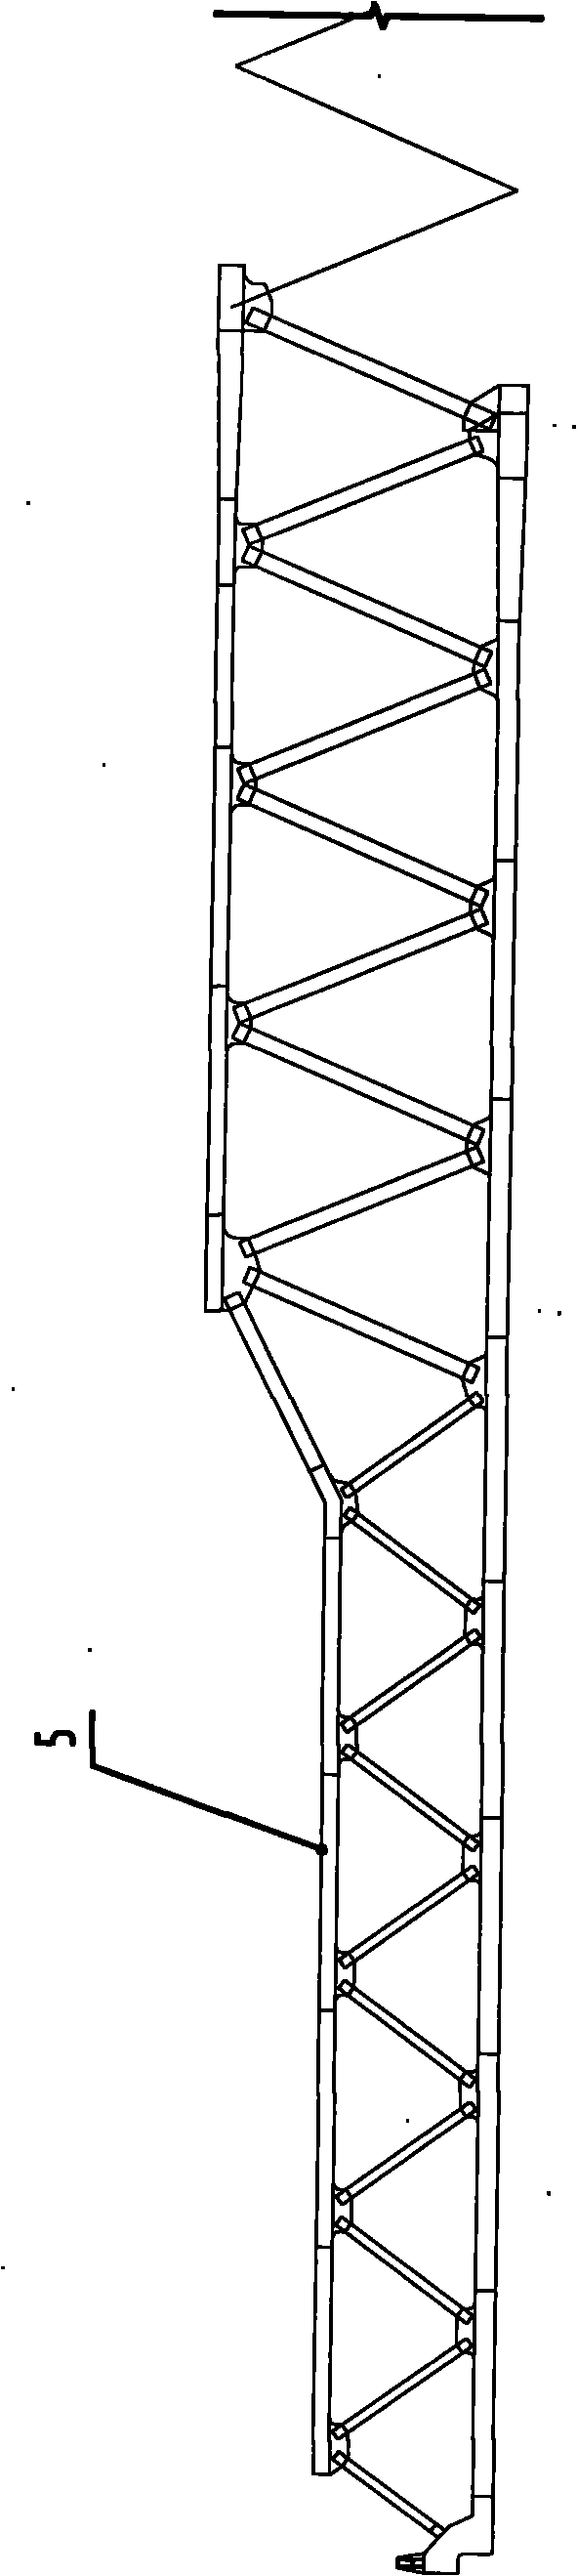 Multipoint synchronous push construction method for porous large-span continuous steel truss girder